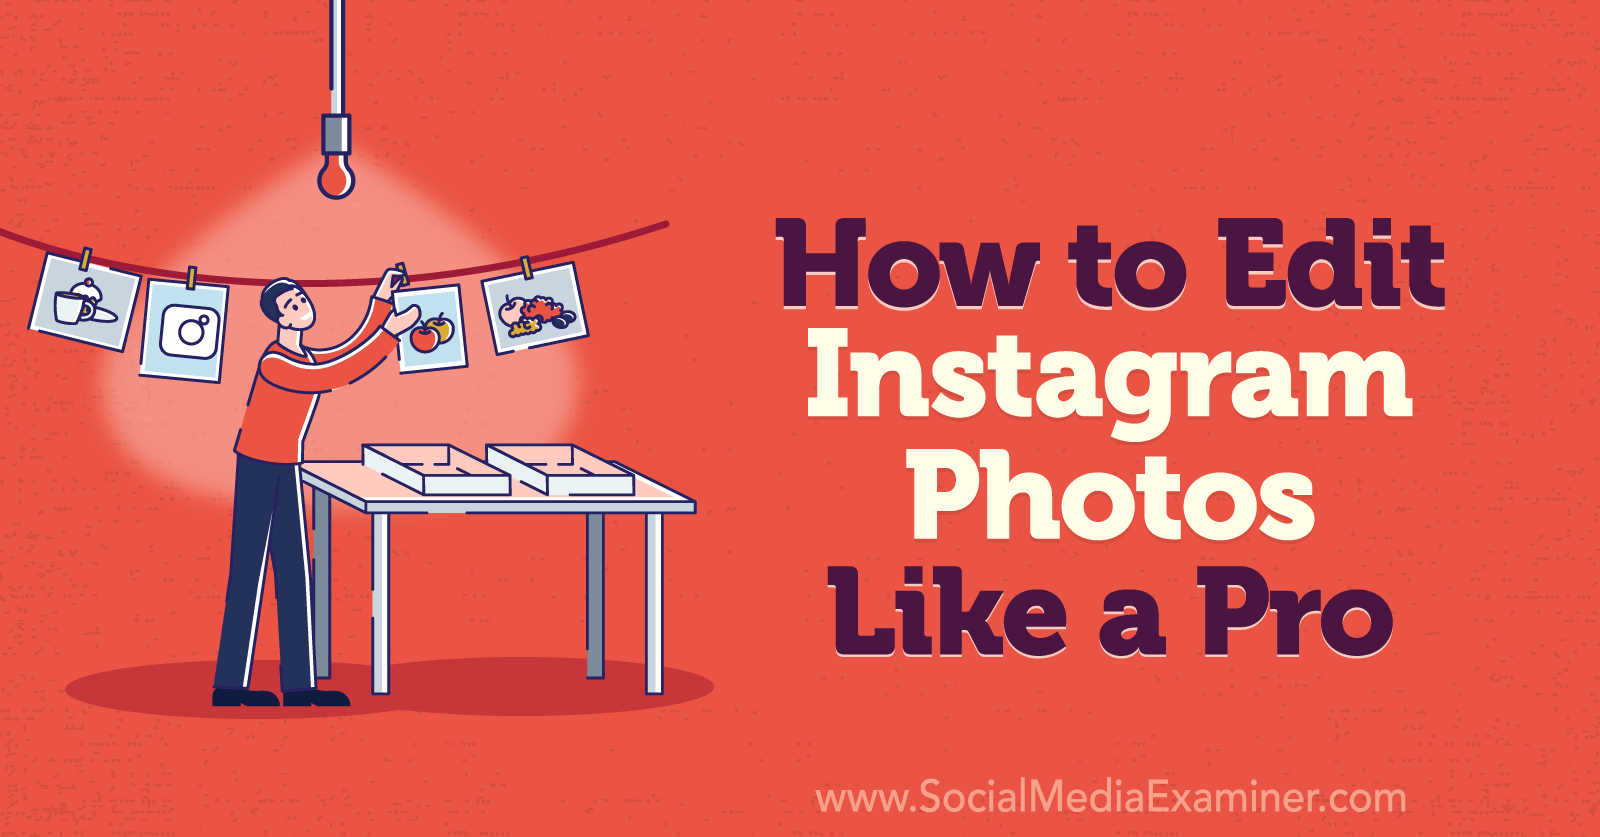 How to Edit Photos on Instagram Like a Pro-Social Media Examiner